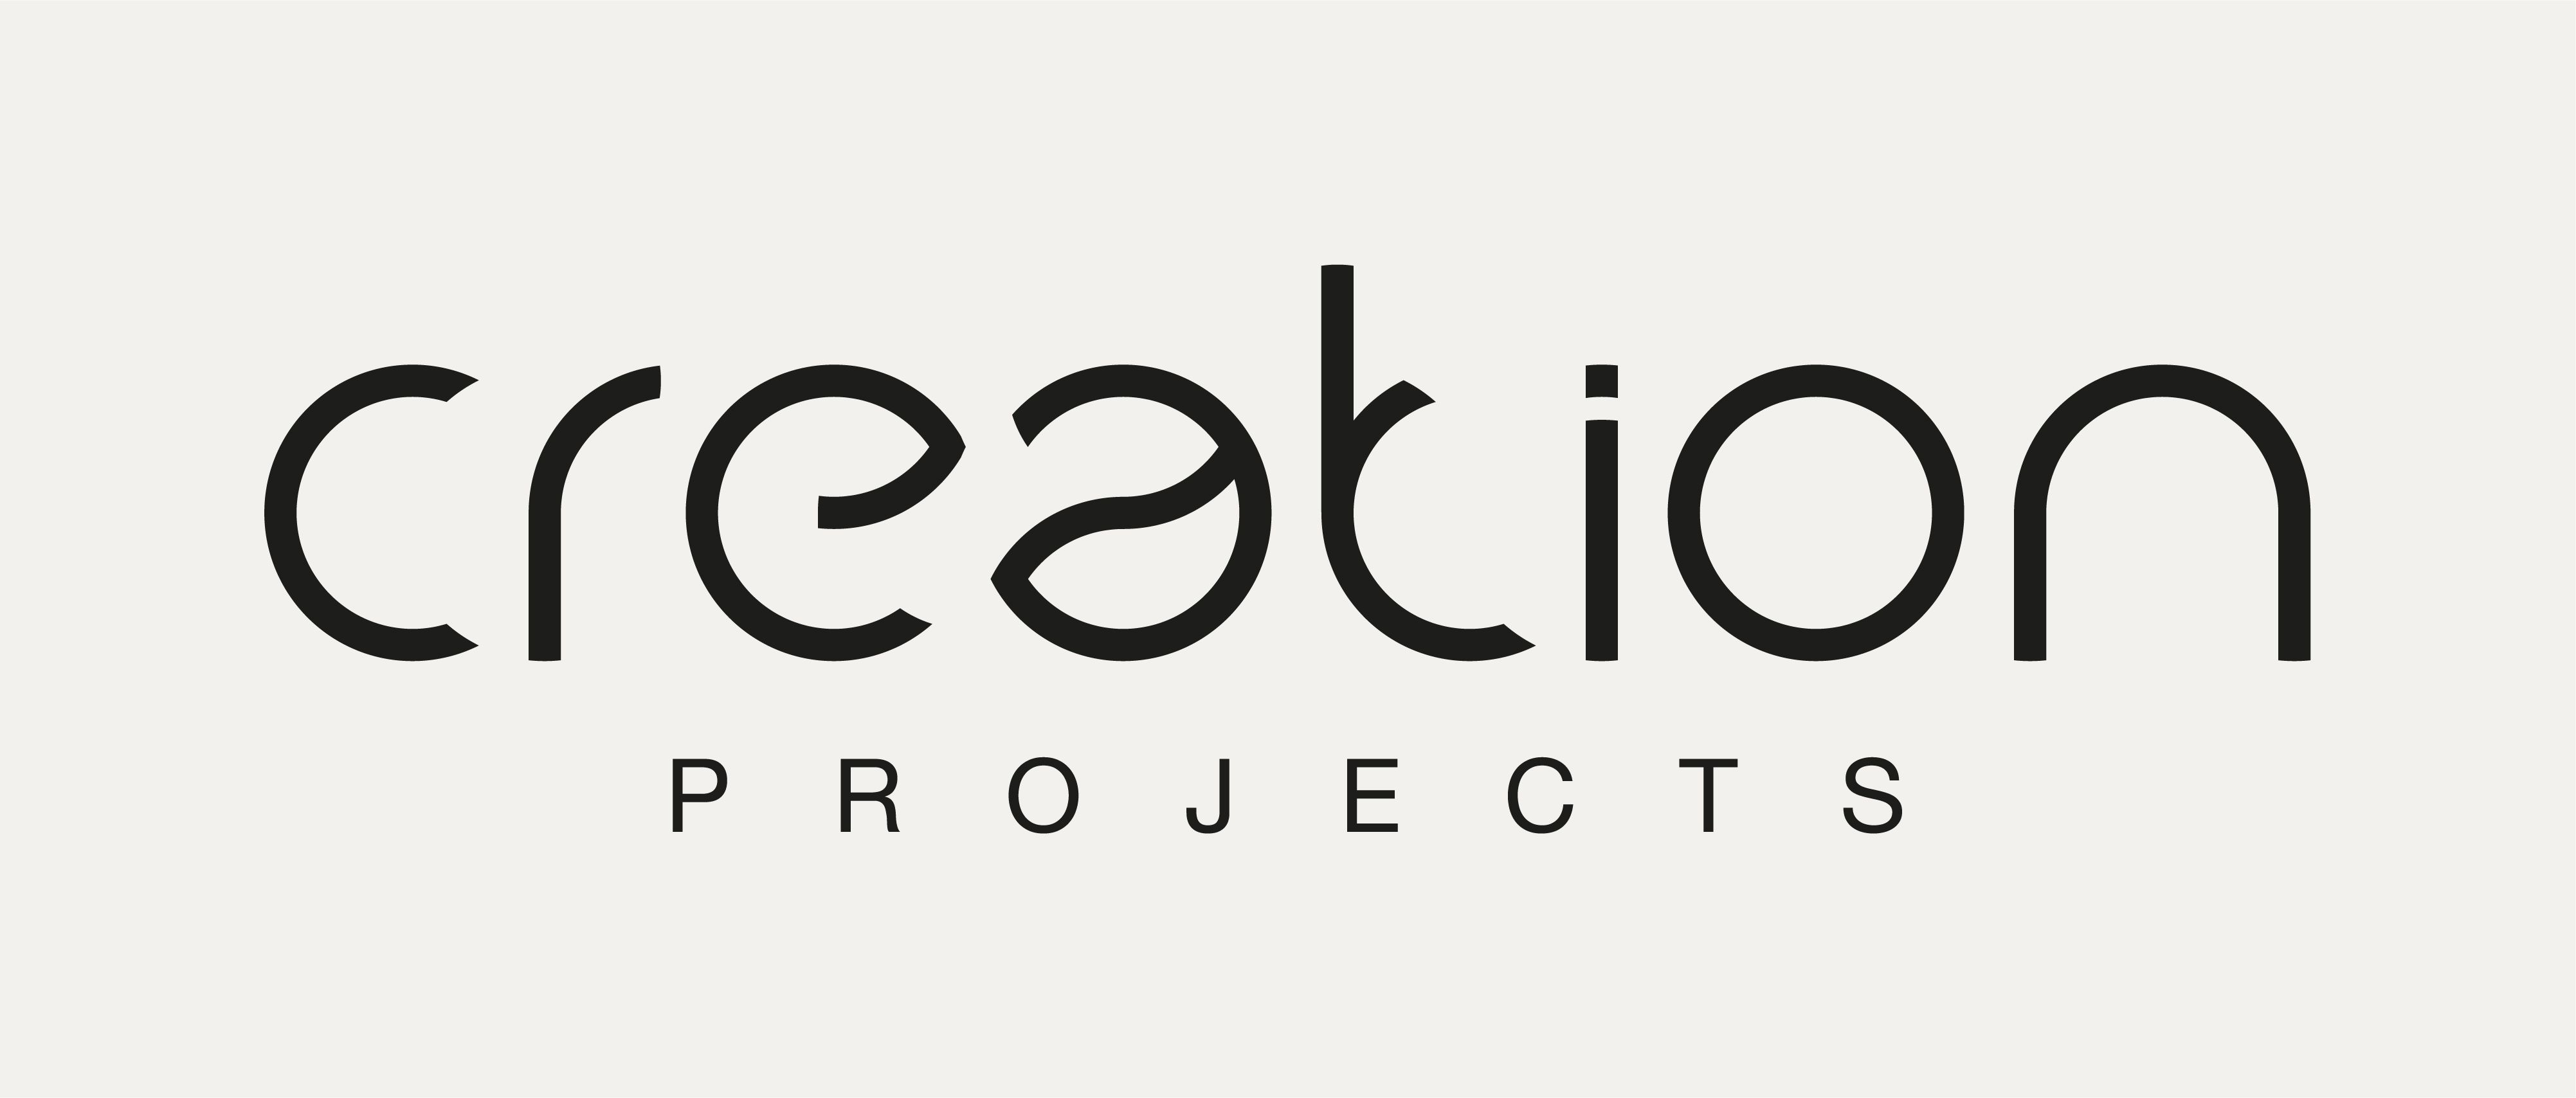 Creation Projects